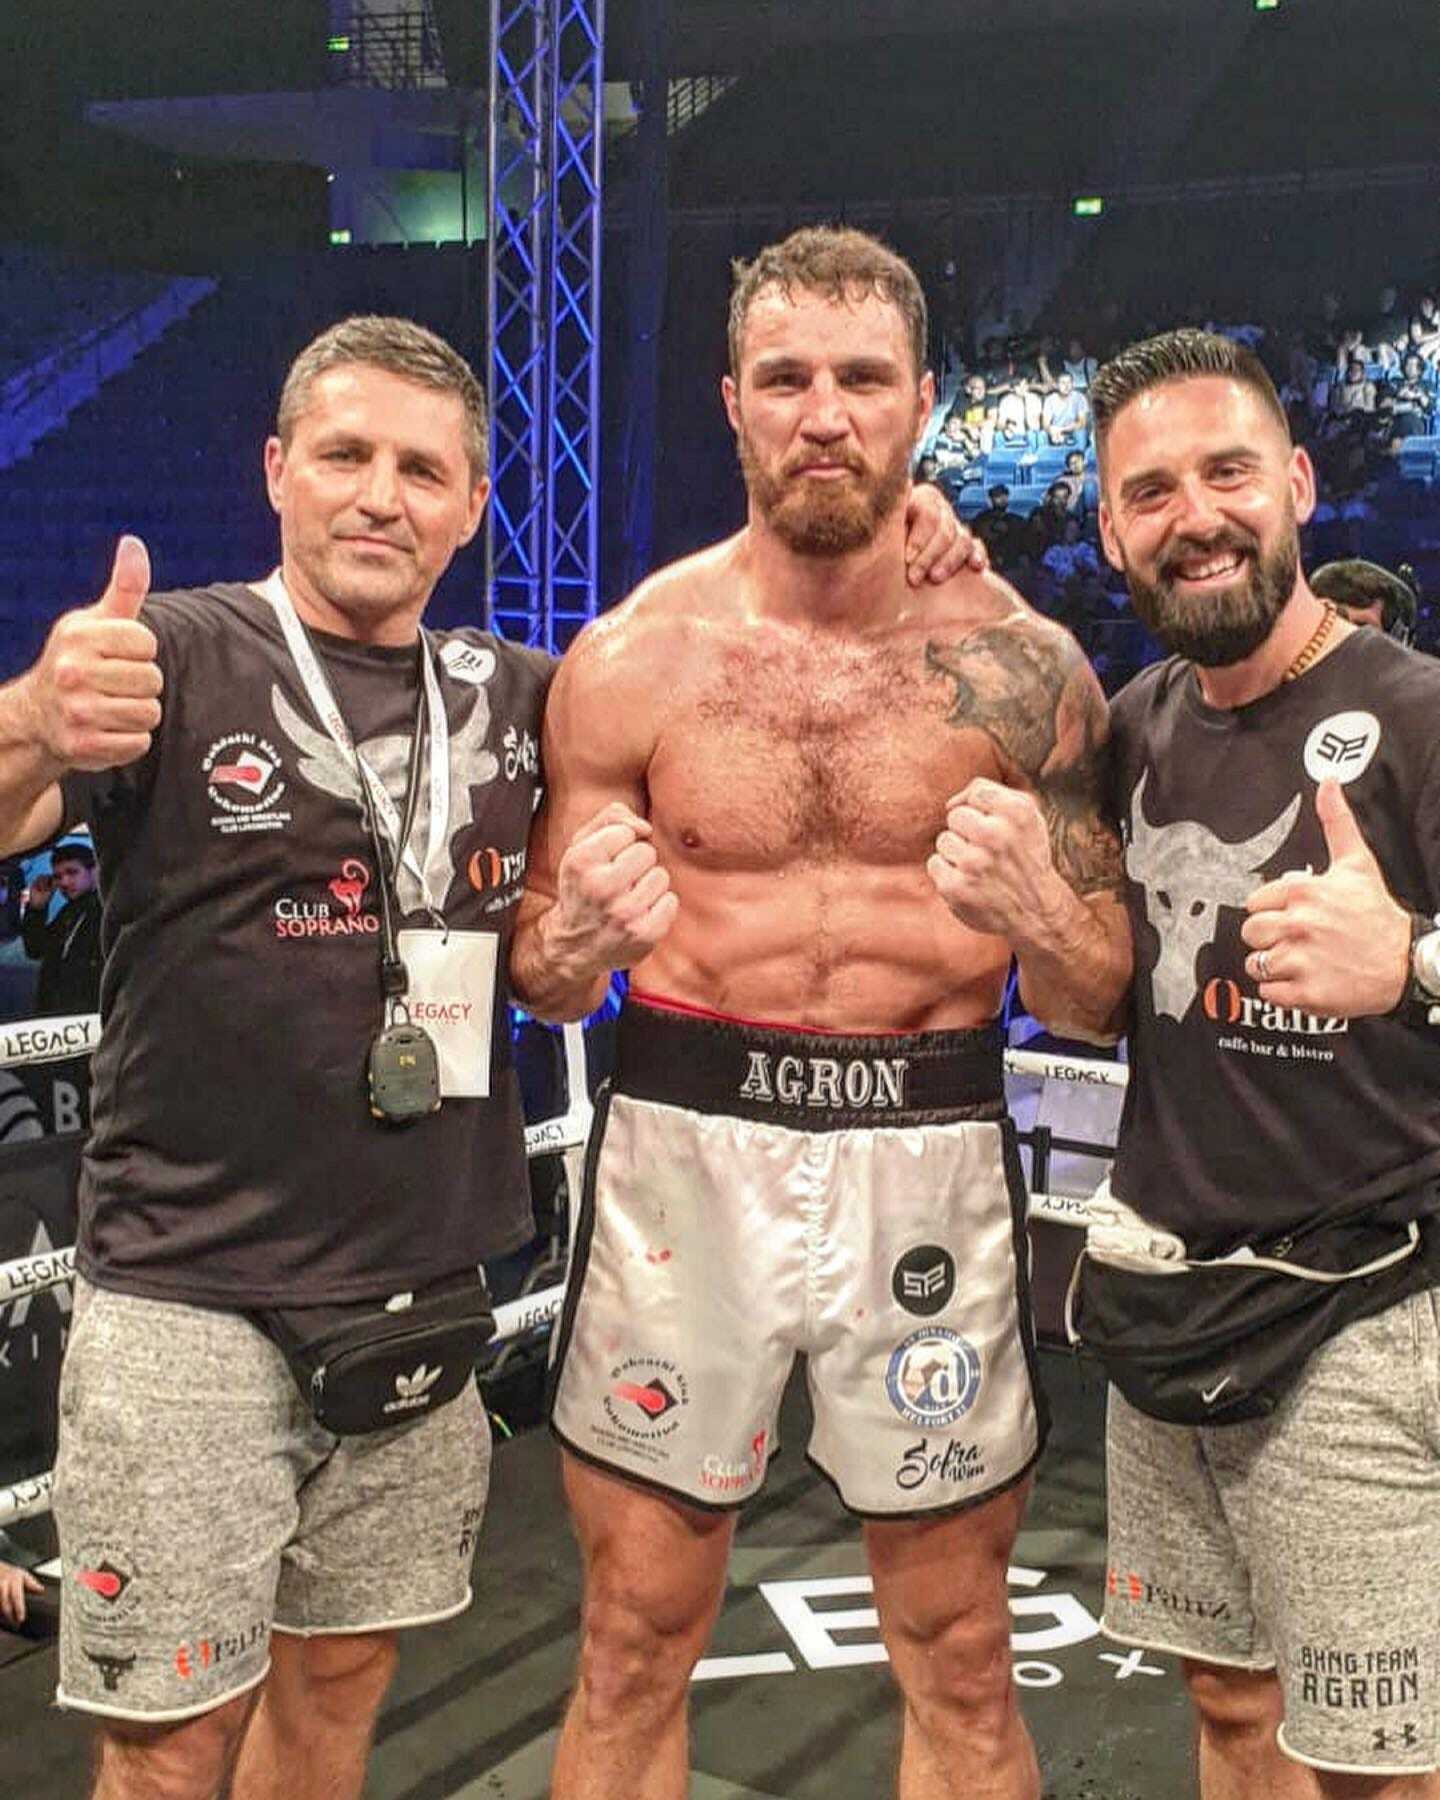 Has a huge impact: the former world champion gave an unexpected reason why Usyk will beat Fury